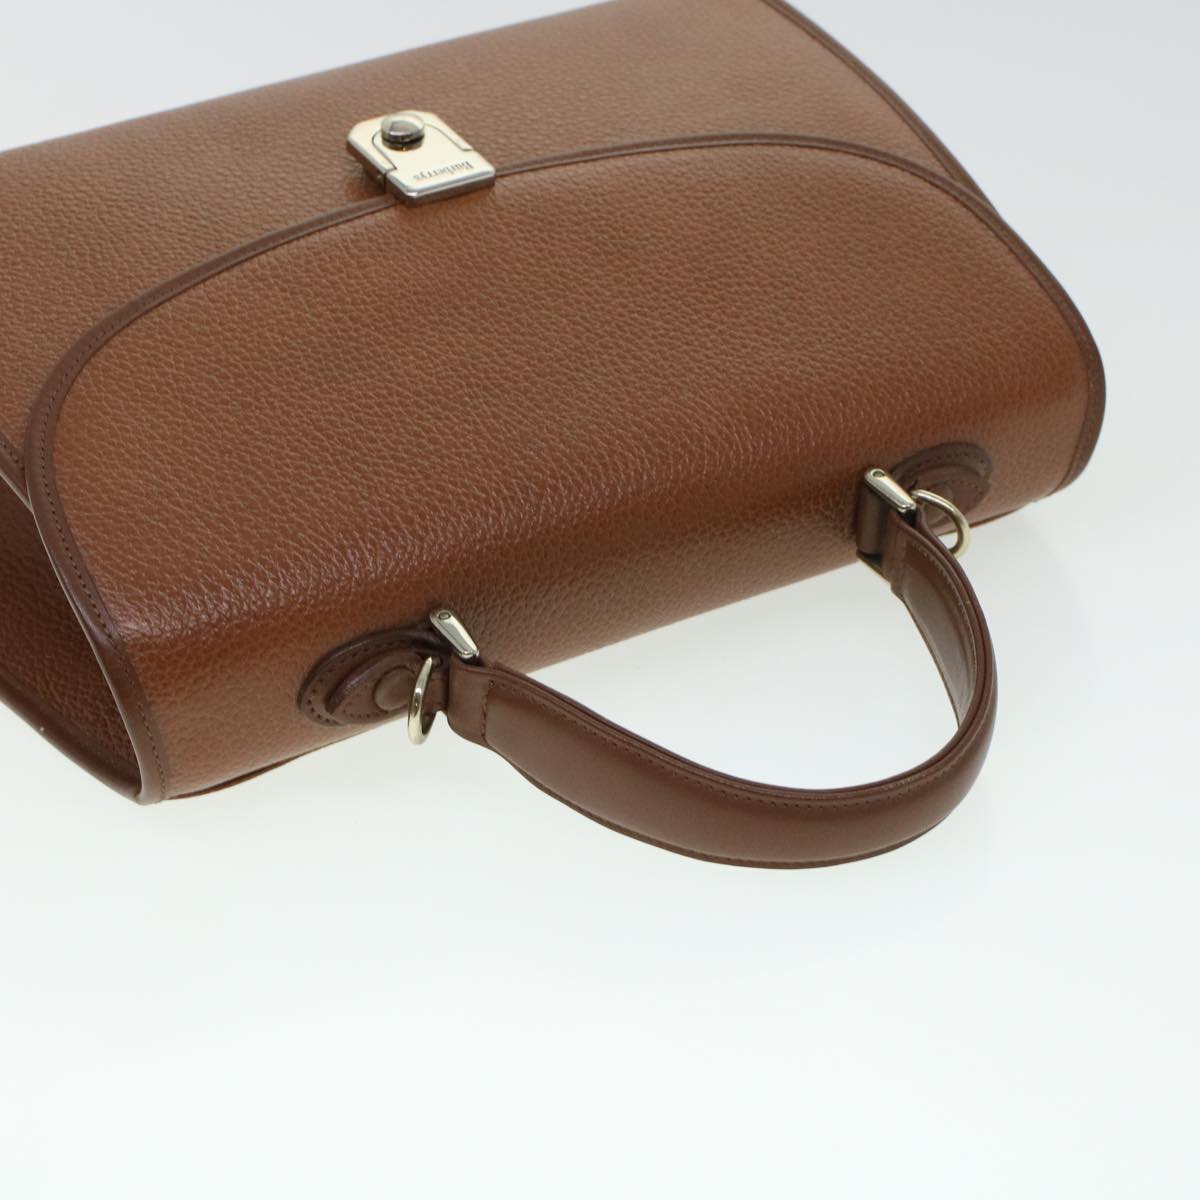 Burberrys Hand Bag Leather 2way Brown Auth am4417